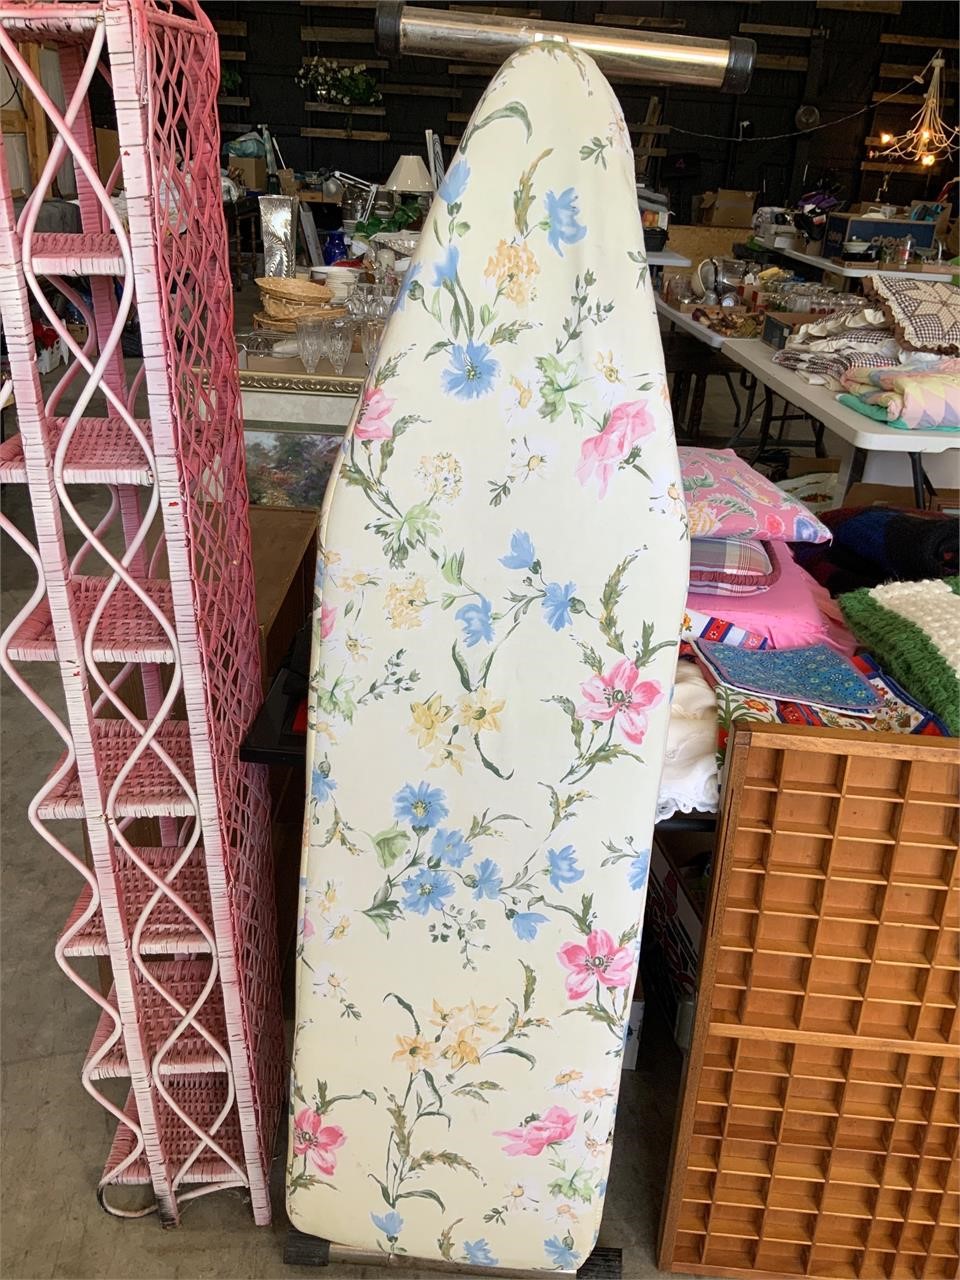 ironing board with flowers